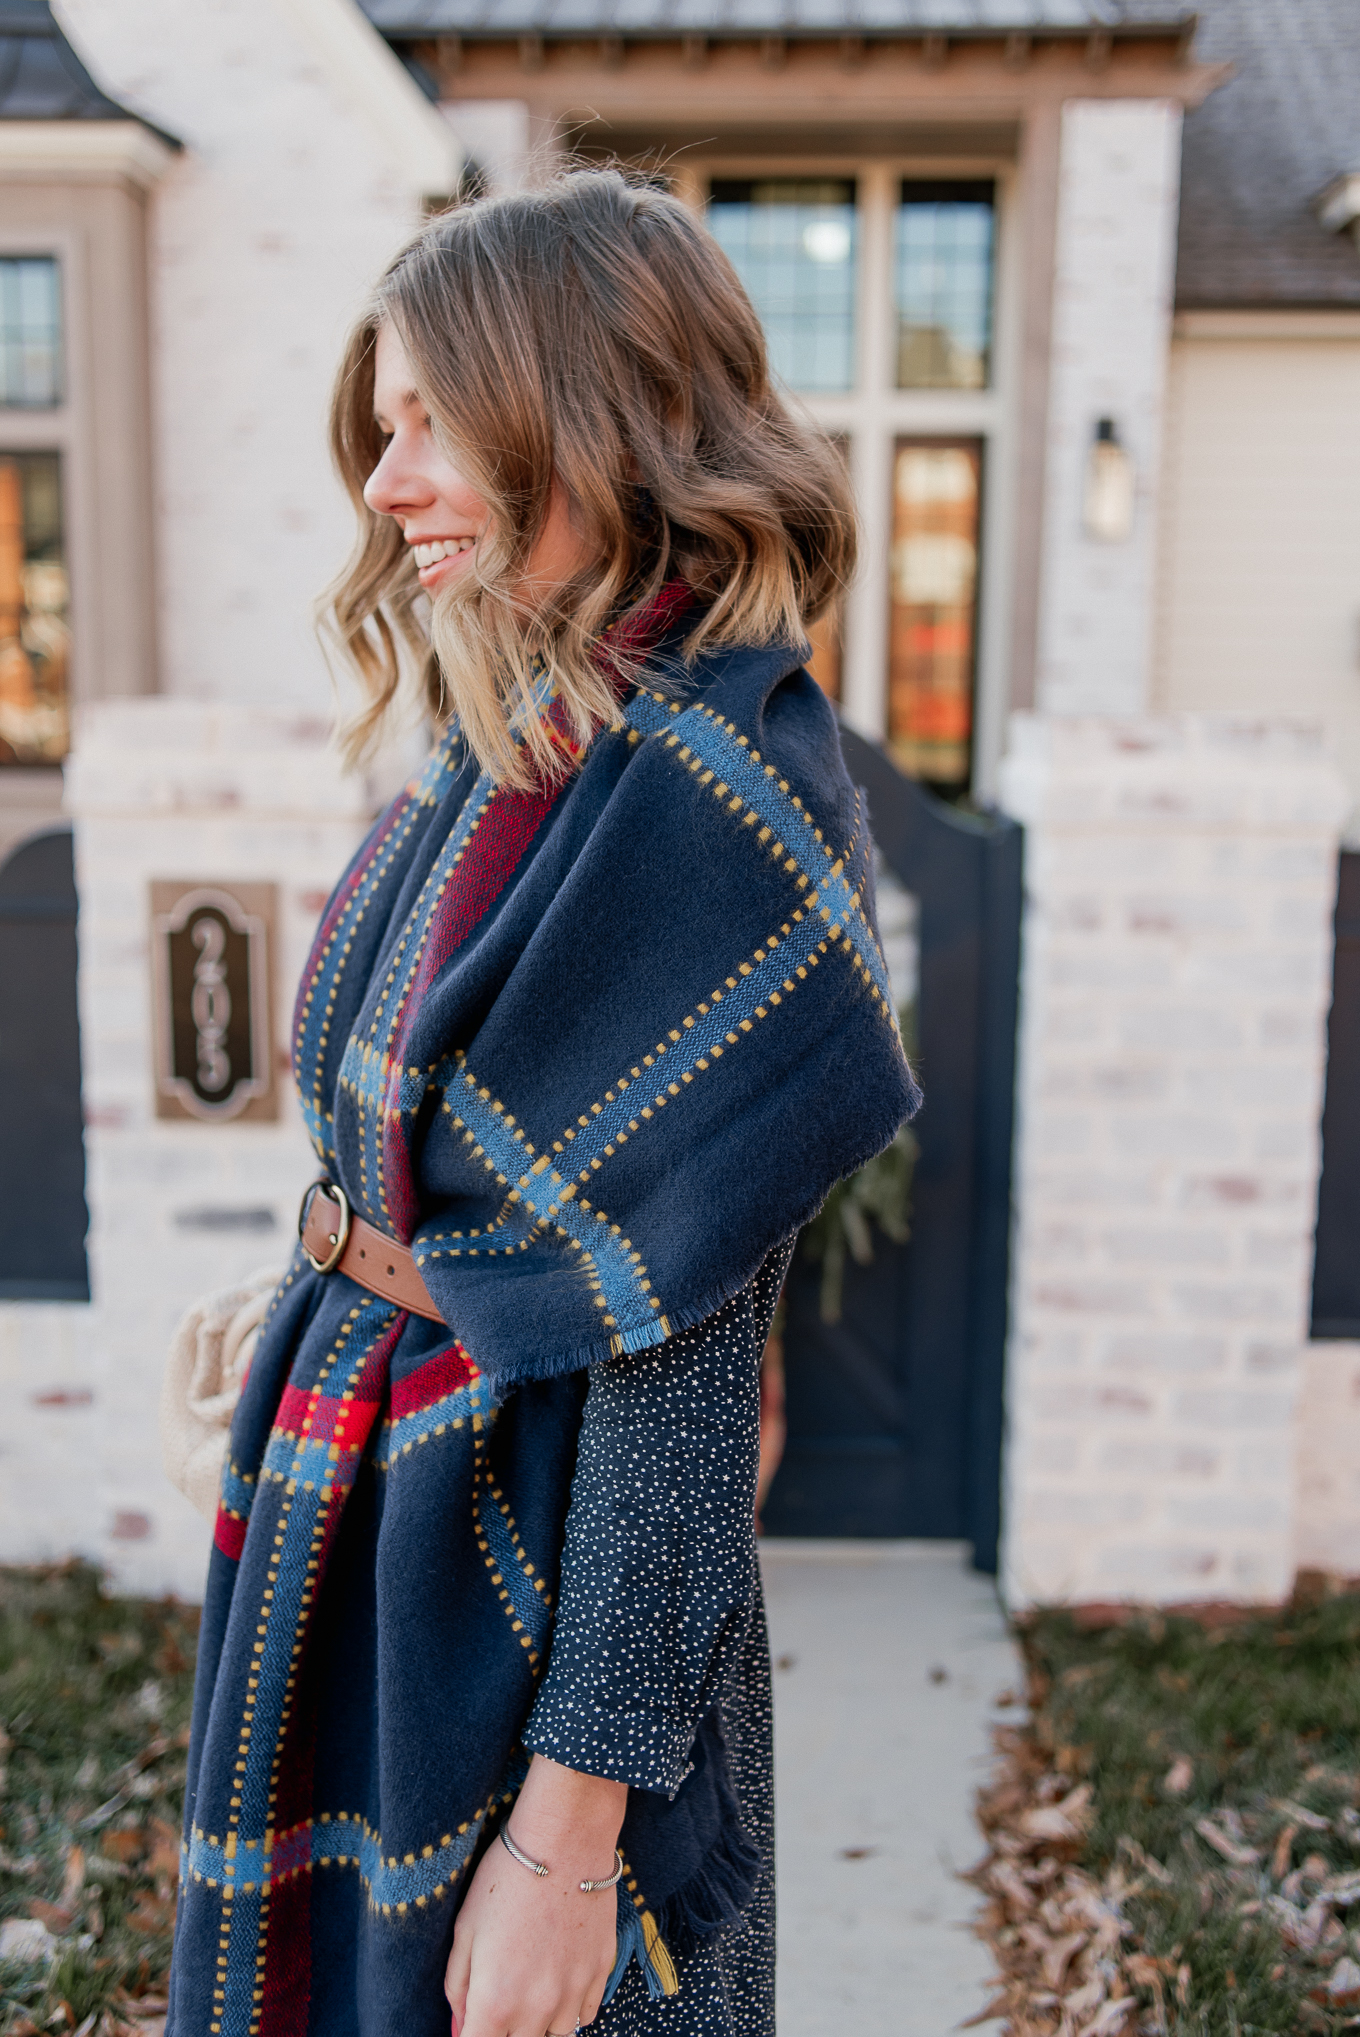 Laura Leigh of Louella Reese shares how to style a scarf as vest this winter season #styletip #scarfvest #winterstyle